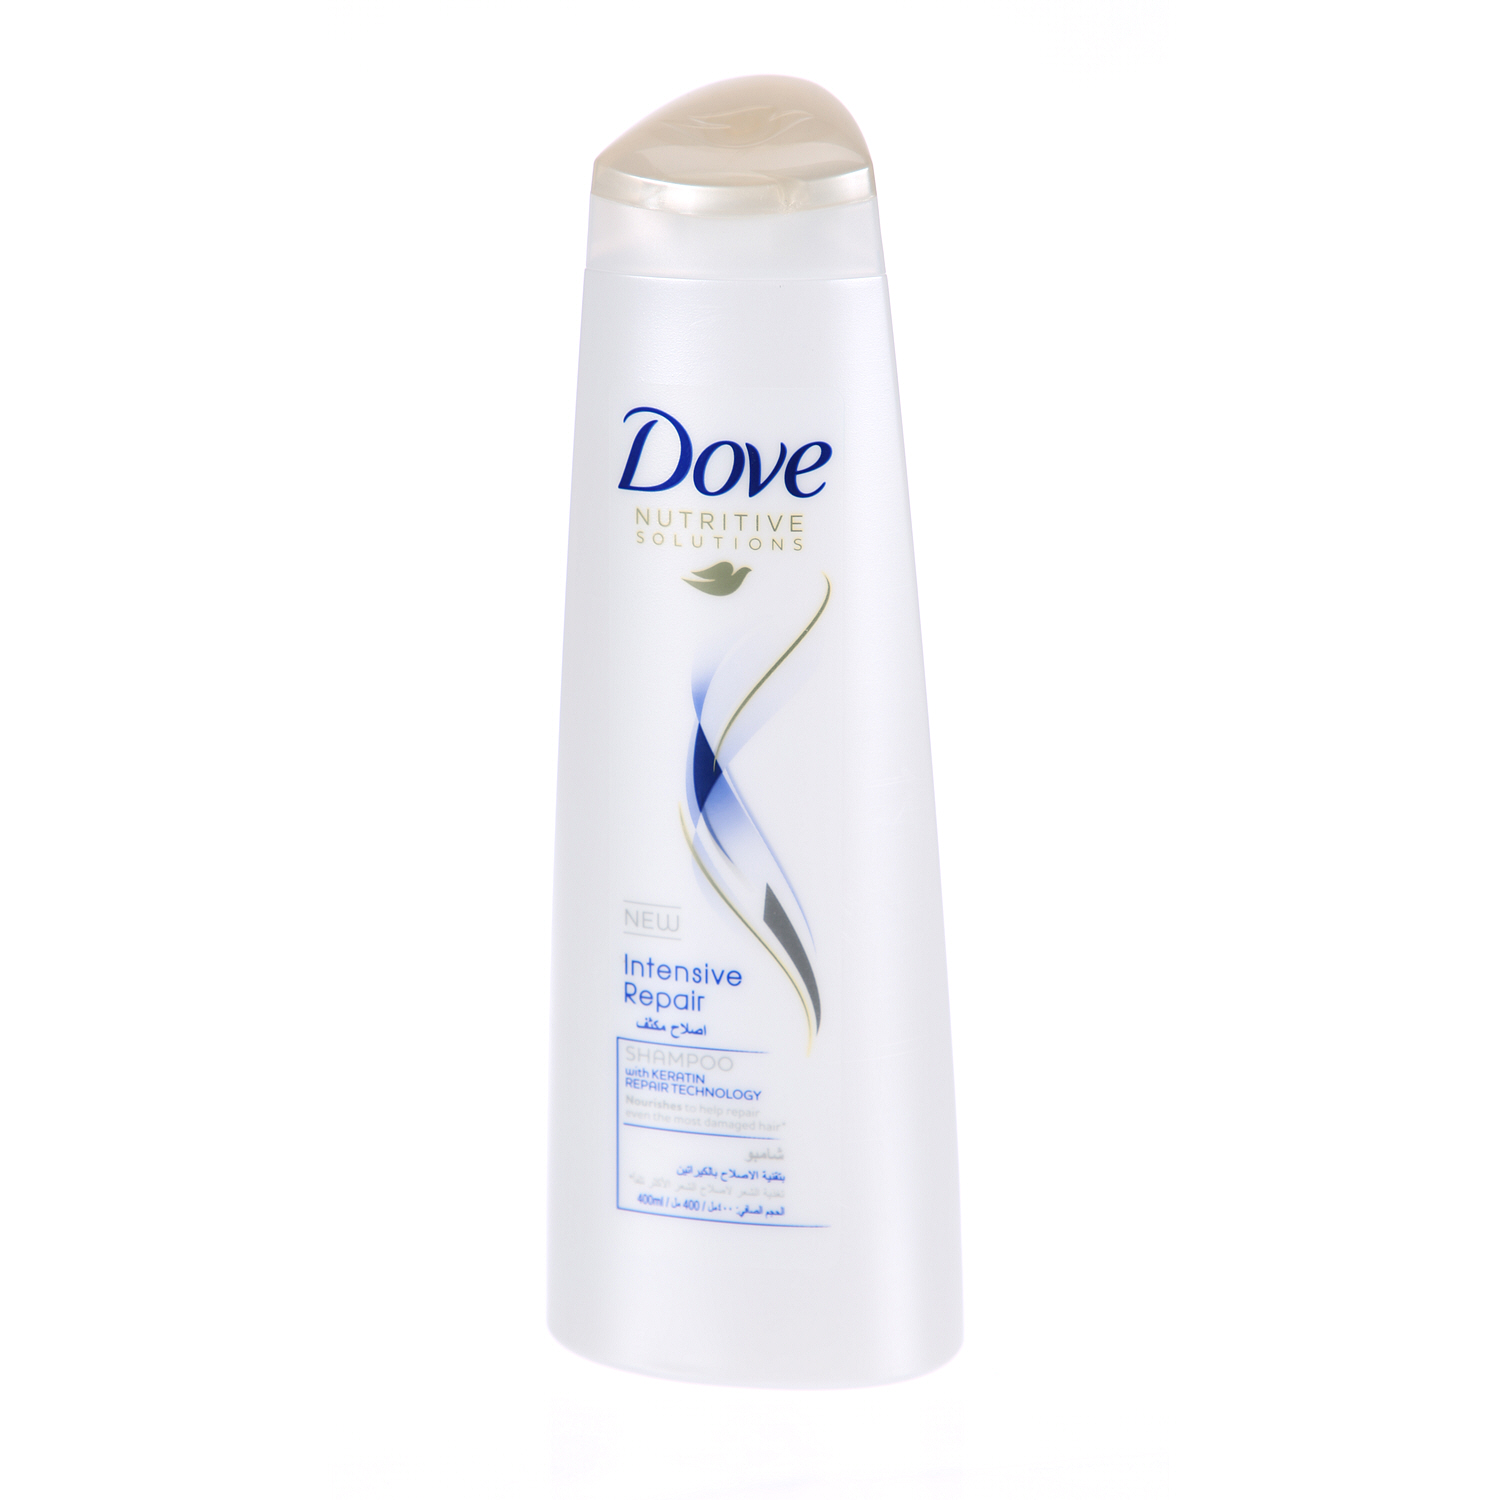 Dove Shampoo for Damaged Hair Intensive Repair Nourishing Care for up to 100% Healthy Looking Hair 400 ml